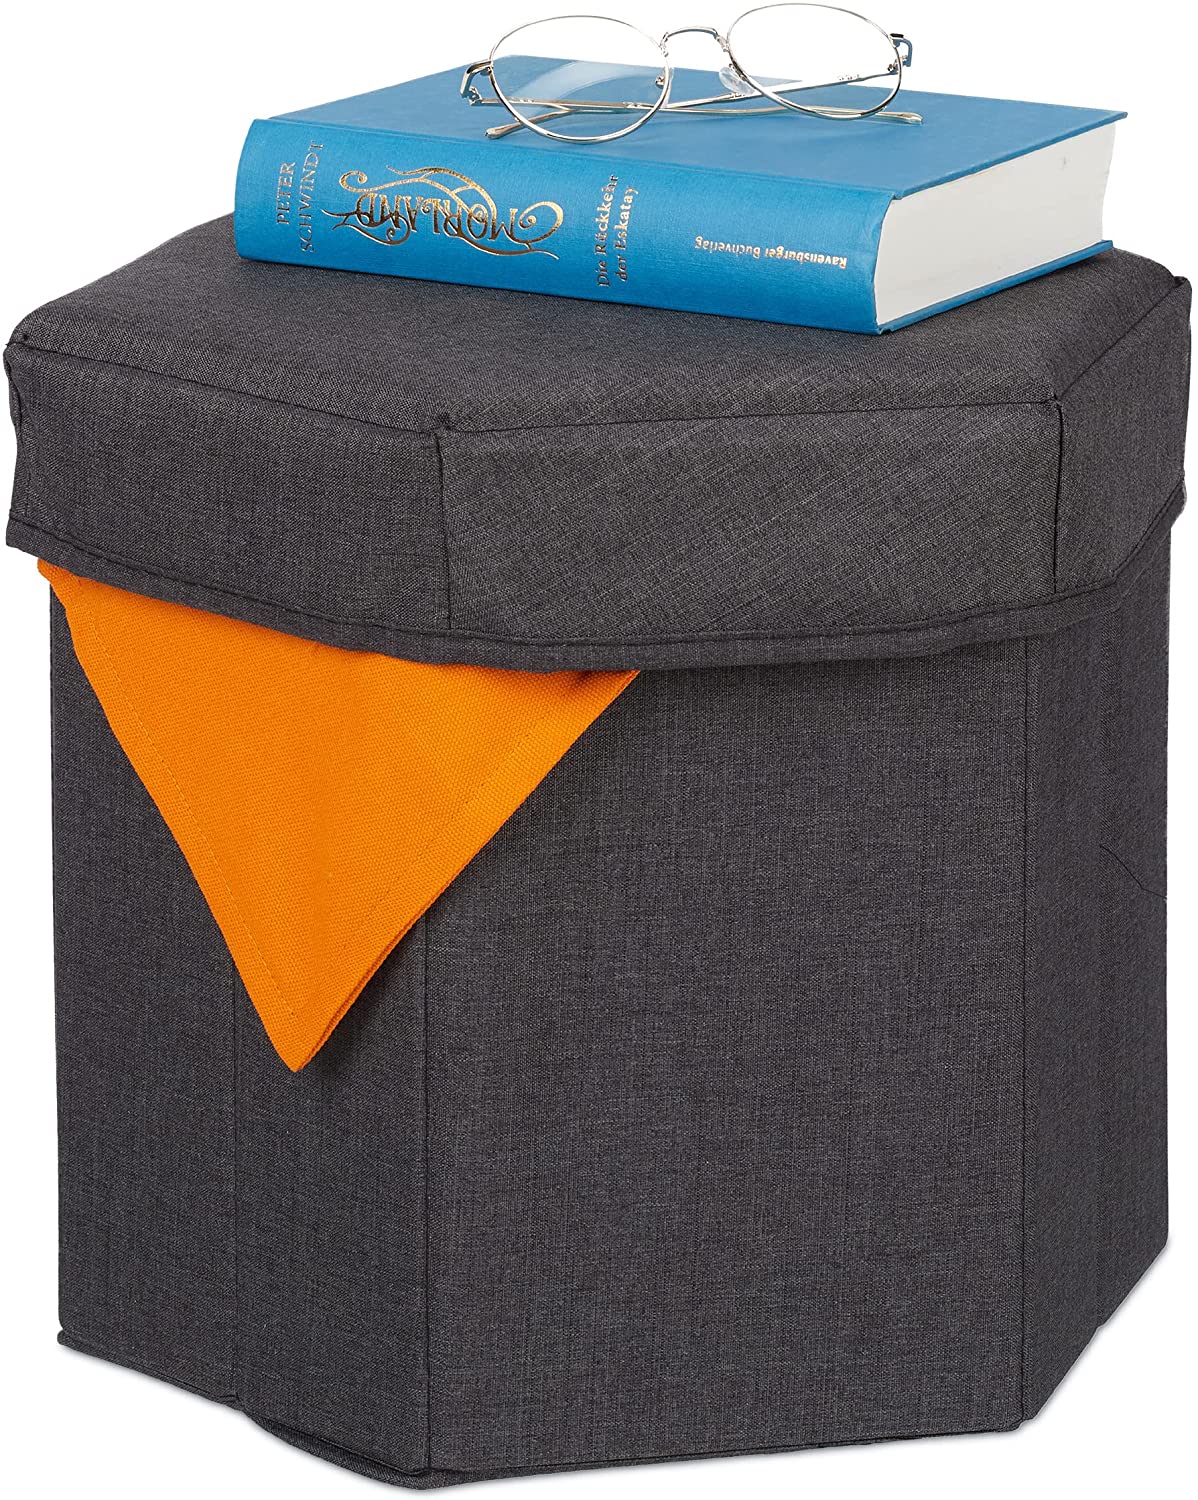 Relaxdays Stool with Storage Space, Foldable, Soft Padded, Living Room, Fabric, H x W x D x 32 cm, Seat Cube, Dark Grey